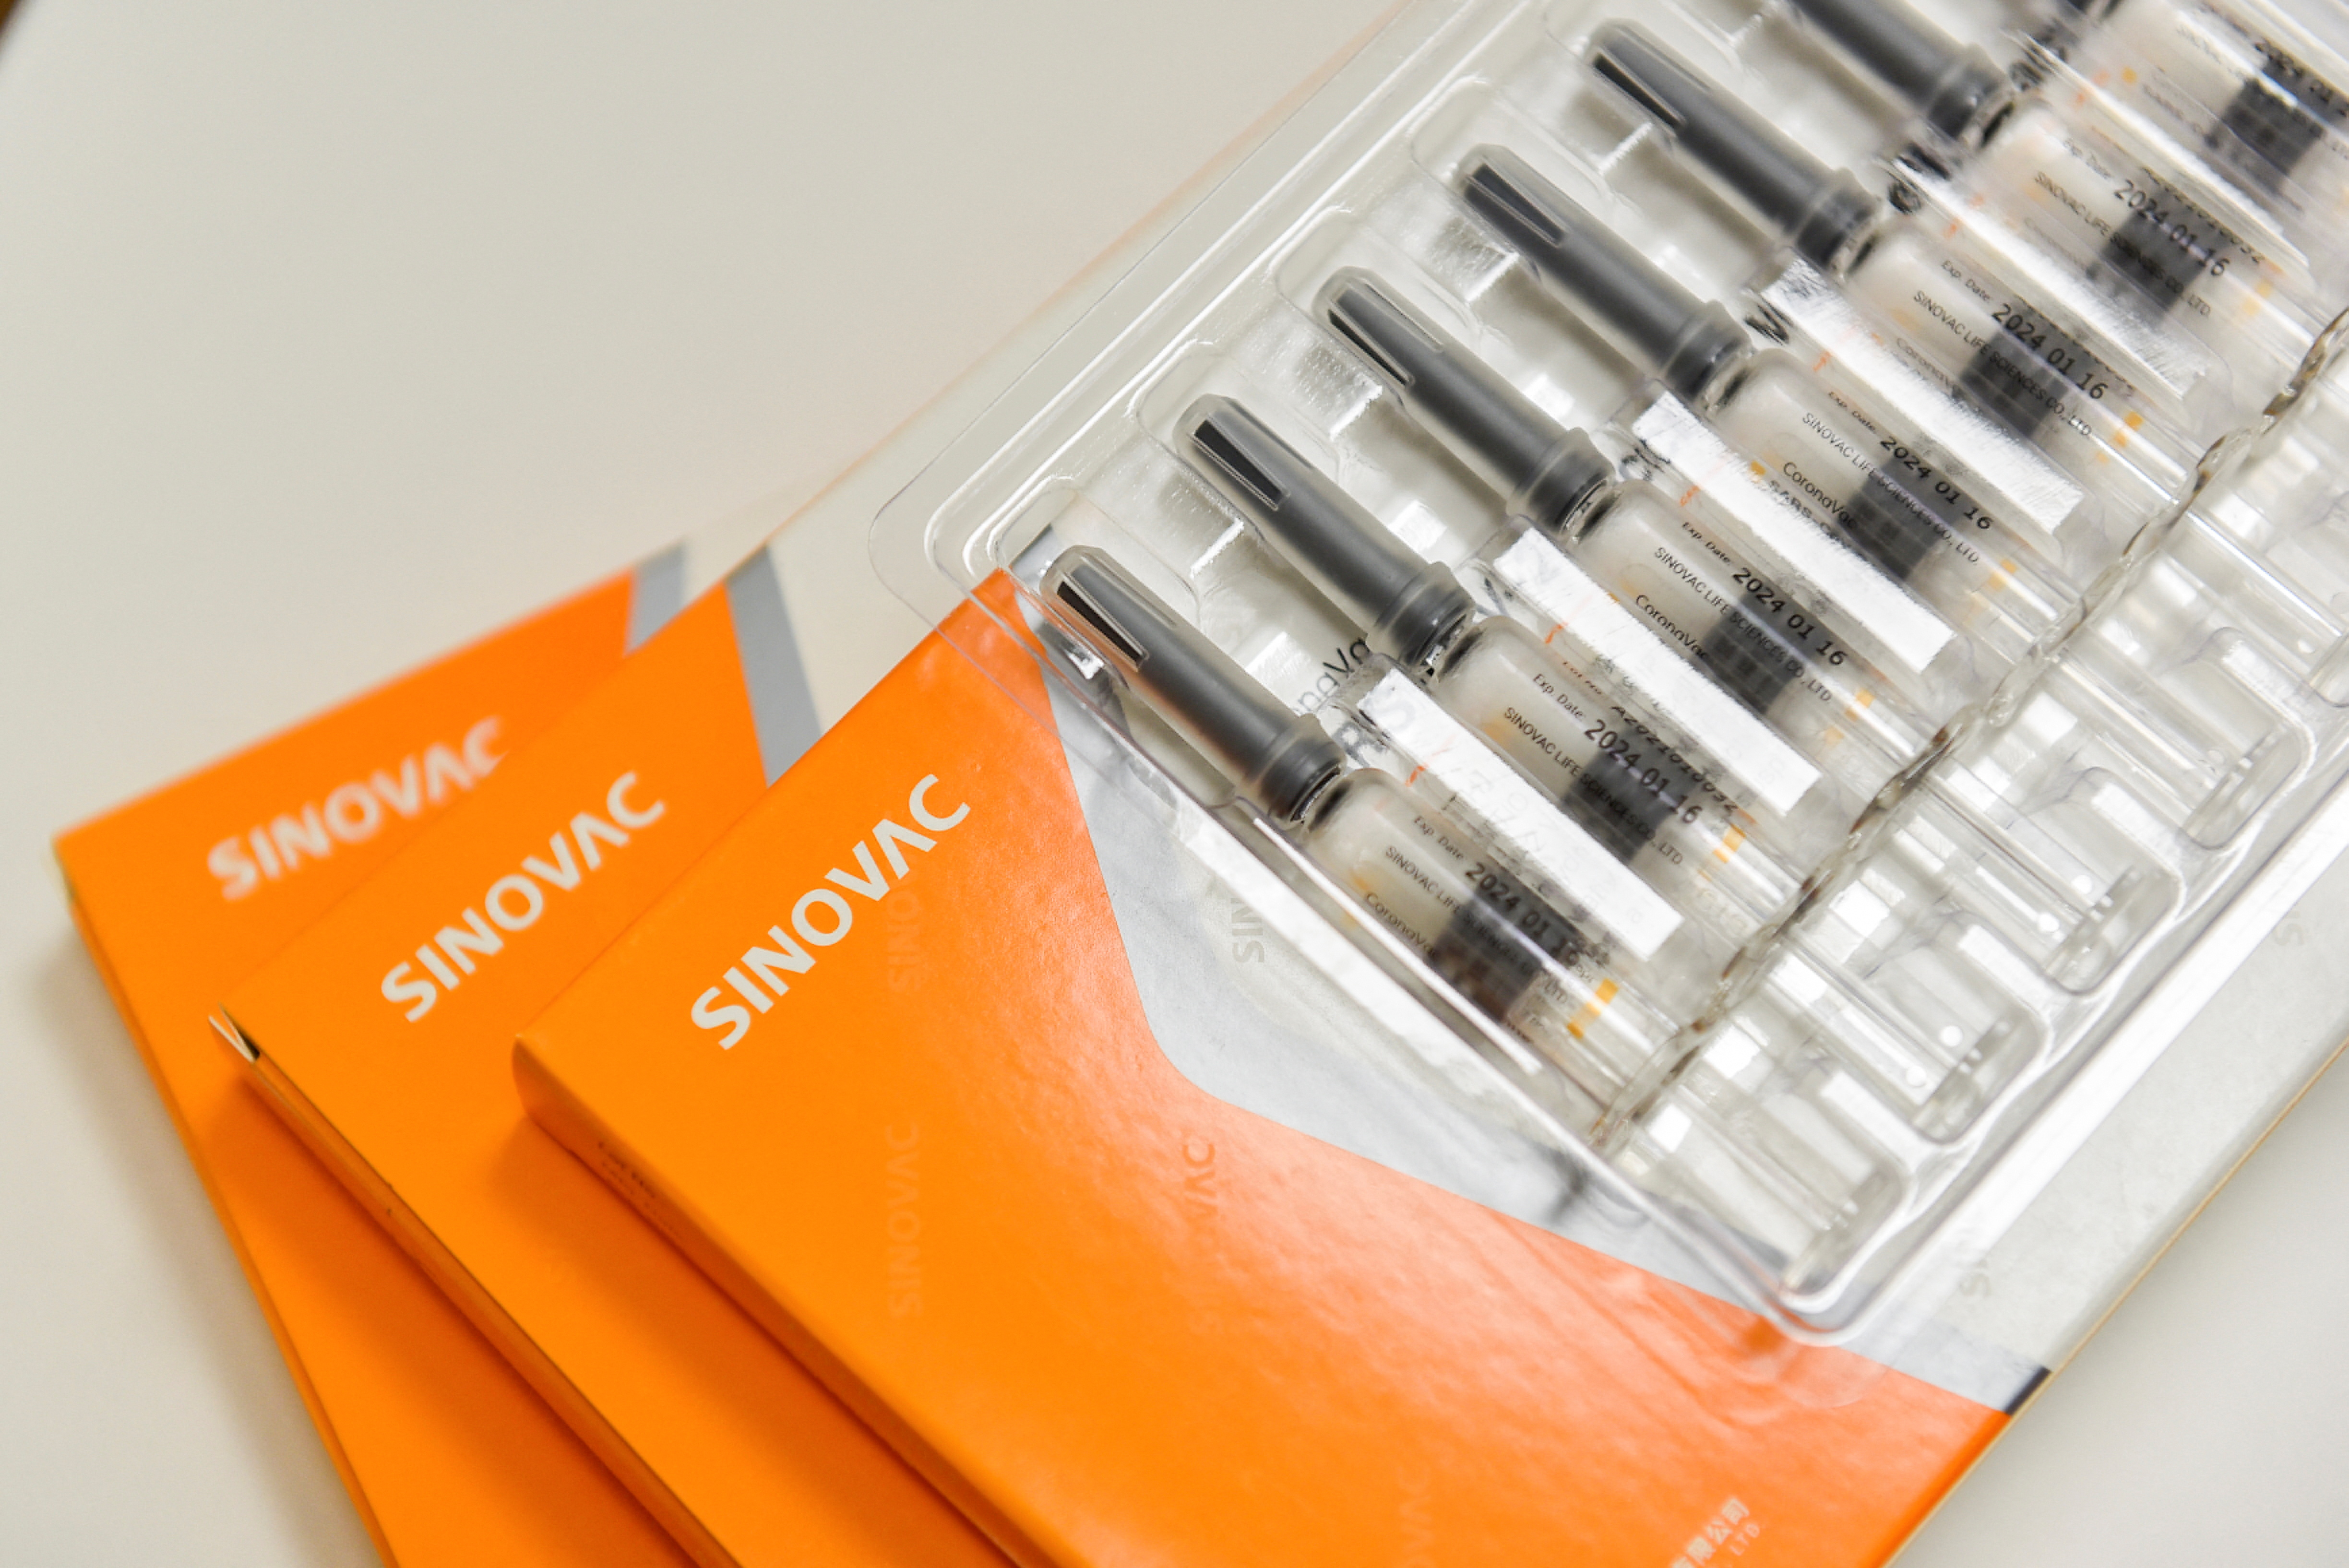 The Sinovac vaccine is pictured at StarMed Specialist Centre, a private medical centre, in Singapore